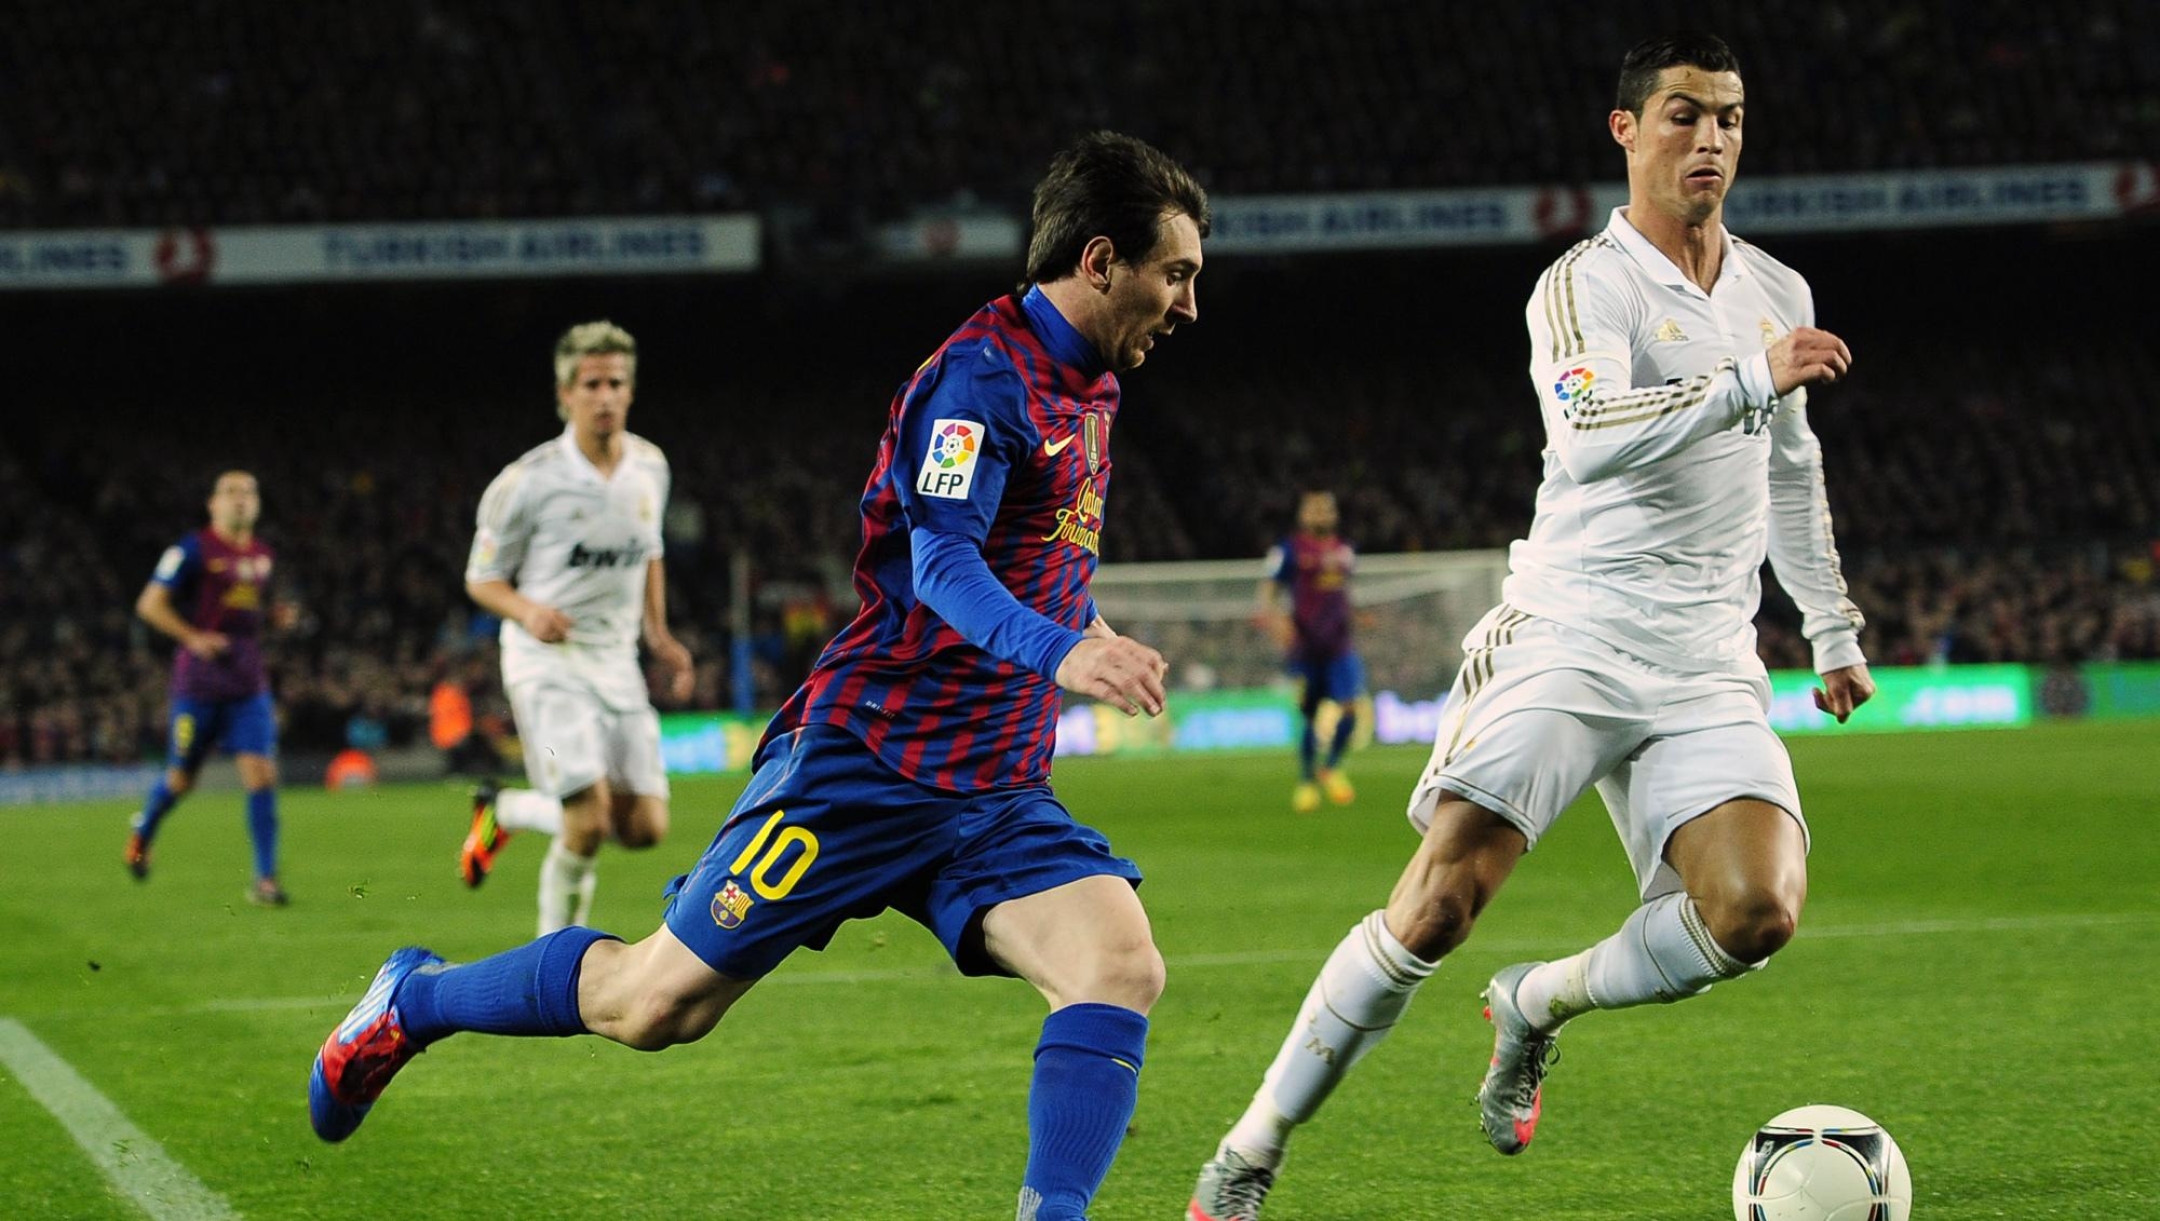 FILE -  FC Barcelona's Lionel Messi from Argentina, left, duels for the ball against Real Madrid's Cristiano Ronaldo, from Portugal, during their quarterfinal, second leg, Copa del Rey soccer match at the Camp Nou stadium, in Barcelona, Spain, Wednesday, Jan. 25, 2012. Cristiano Ronaldo, one of soccer's greatest ever players, was official unveiled for Saudi Arabian team Al Nassr on Tuesday, Jan. 3, 2023. Ronaldo, who has won five Ballon d'Ors awards and five Champions League titles, spent the past two decades at the top level of the European game, playing at three of the biggest clubs in the world: Manchester United, Real Madrid and Juventus. (AP Photo/Manu Fernandez, File)